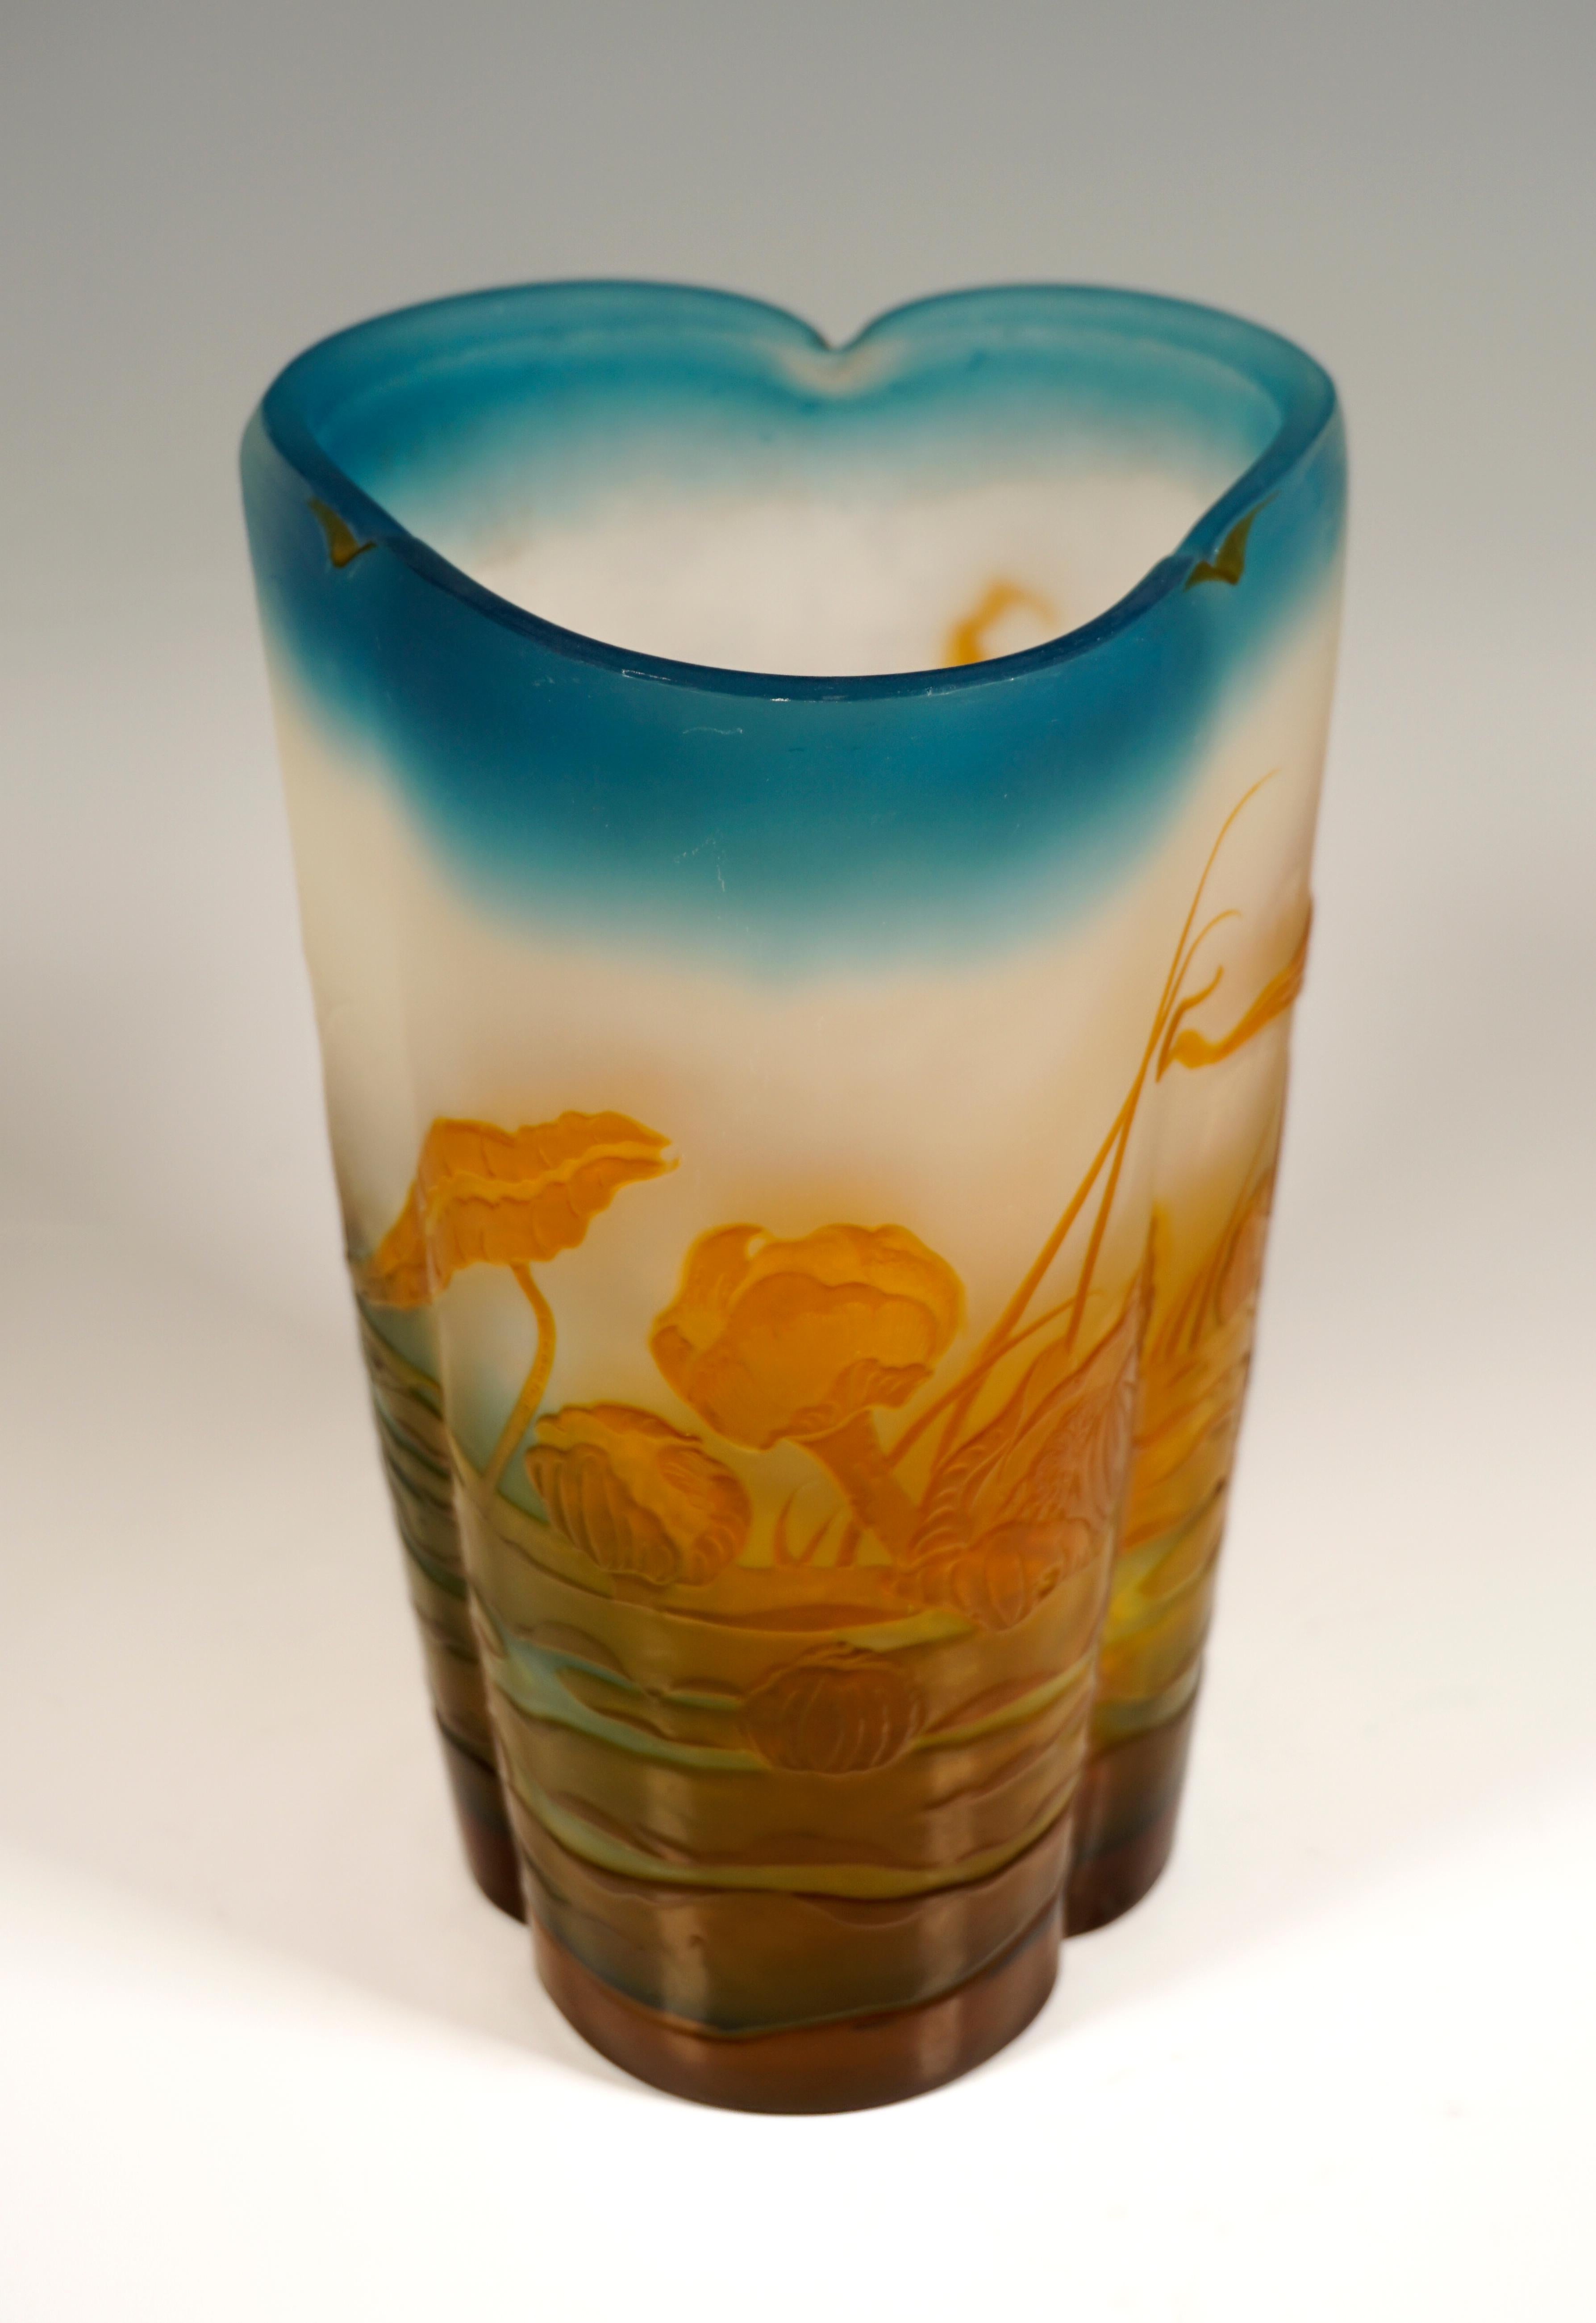 Large Émile Gallé Art Nouveau Vase with Water-Lily Pond Decor, France, 1904-06 In Good Condition For Sale In Vienna, AT